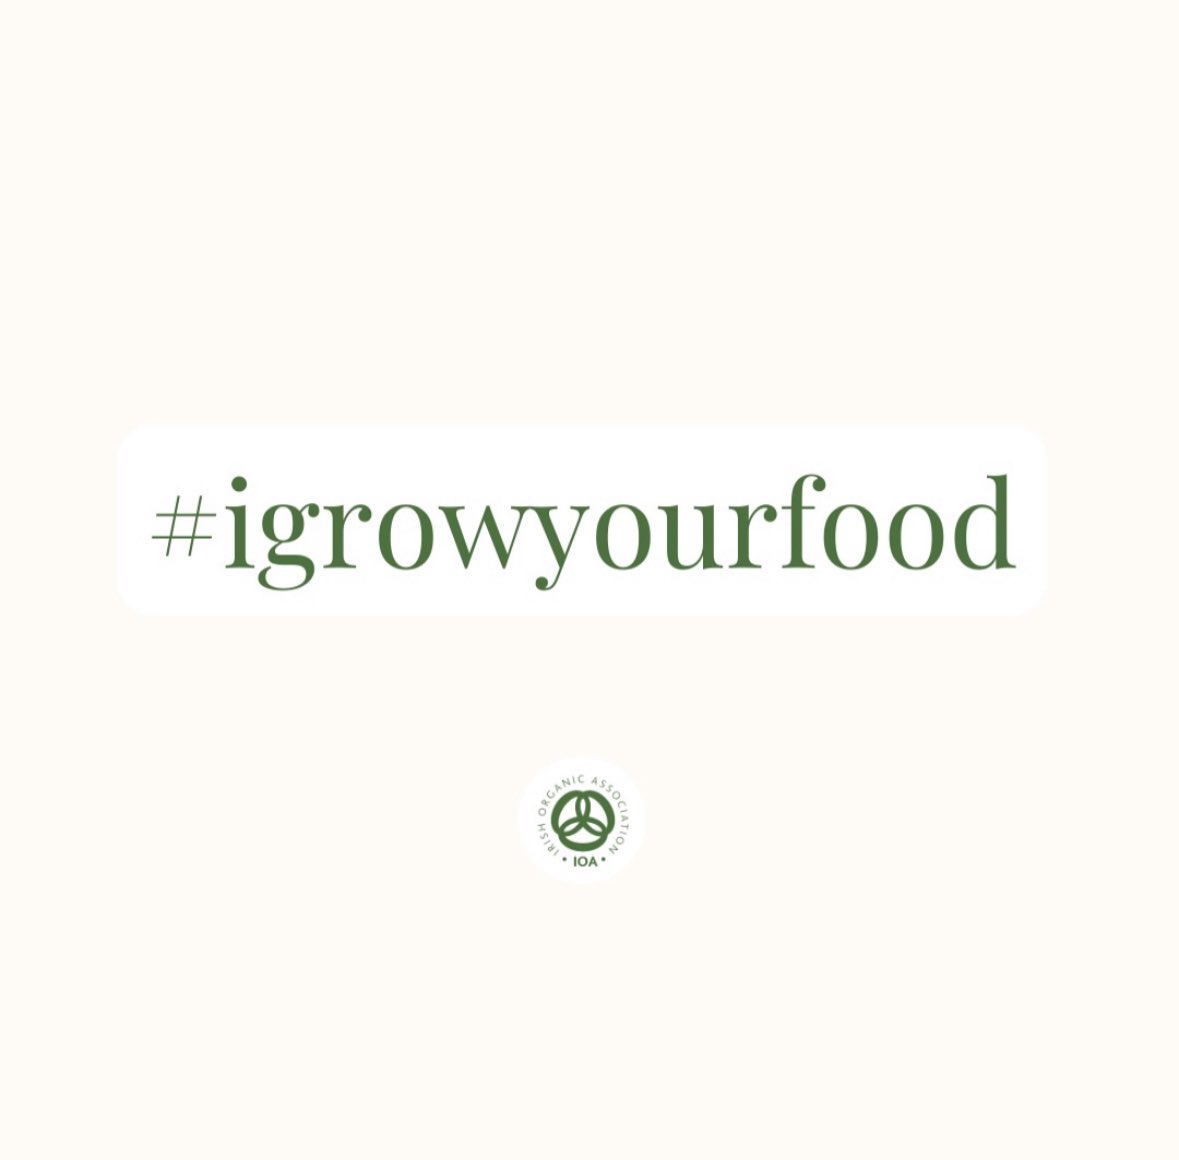 What a fabulous day celebrating and showcasing farmers and producers who sustainably grow your food #IGrowYourFood